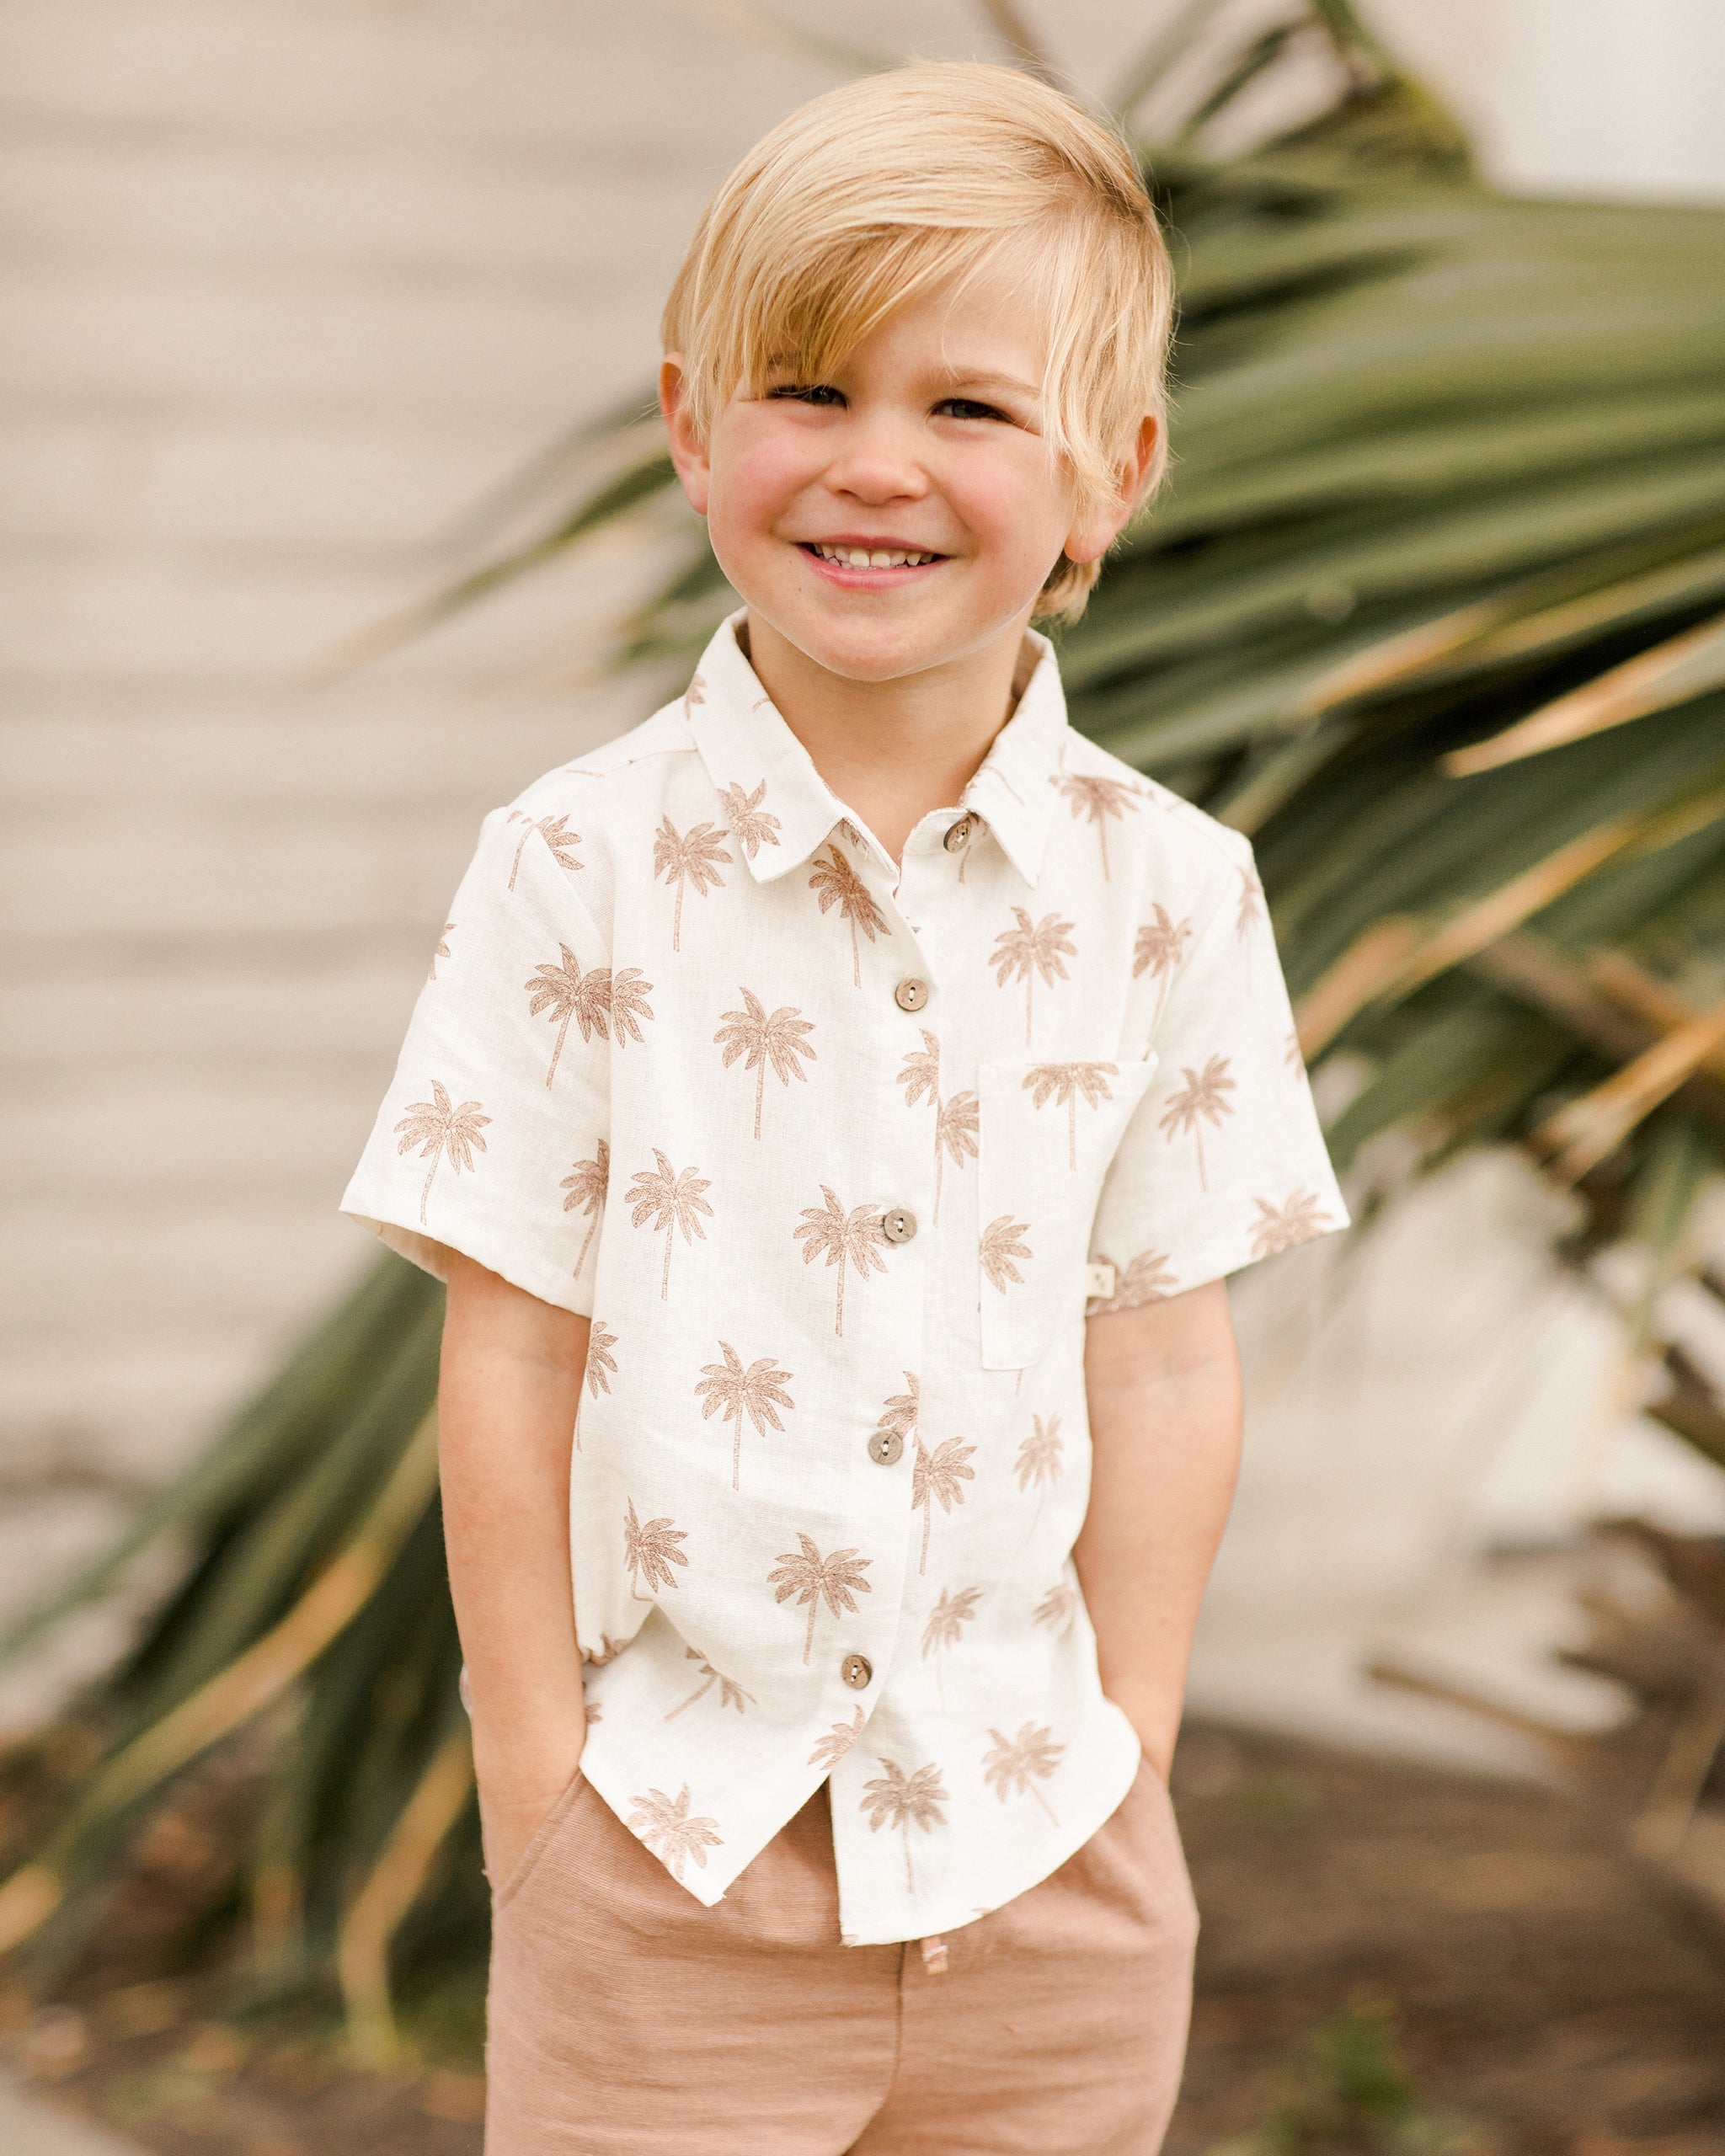 Collared Short Sleeve Shirt || Paradise - Rylee + Cru | Kids Clothes | Trendy Baby Clothes | Modern Infant Outfits |